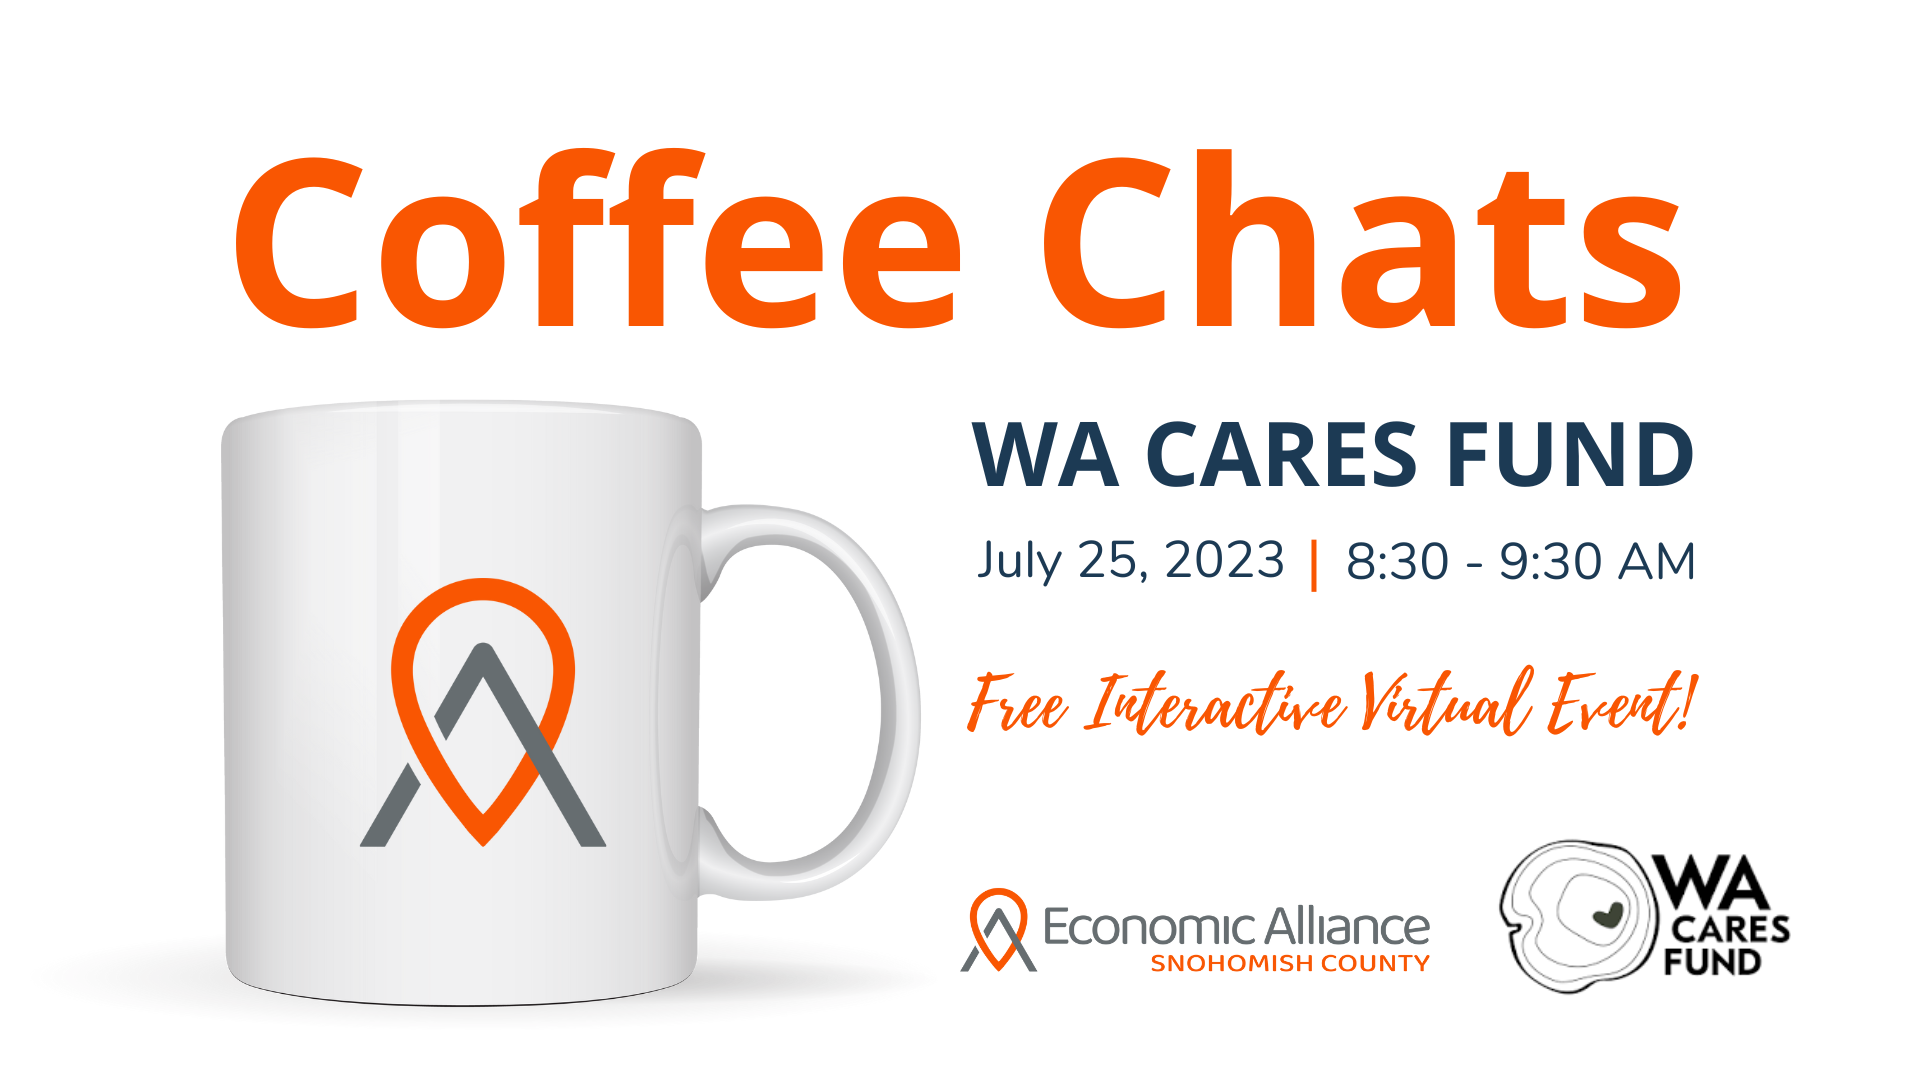 Event Promo Photo For Coffee Chats - WA Cares Fund